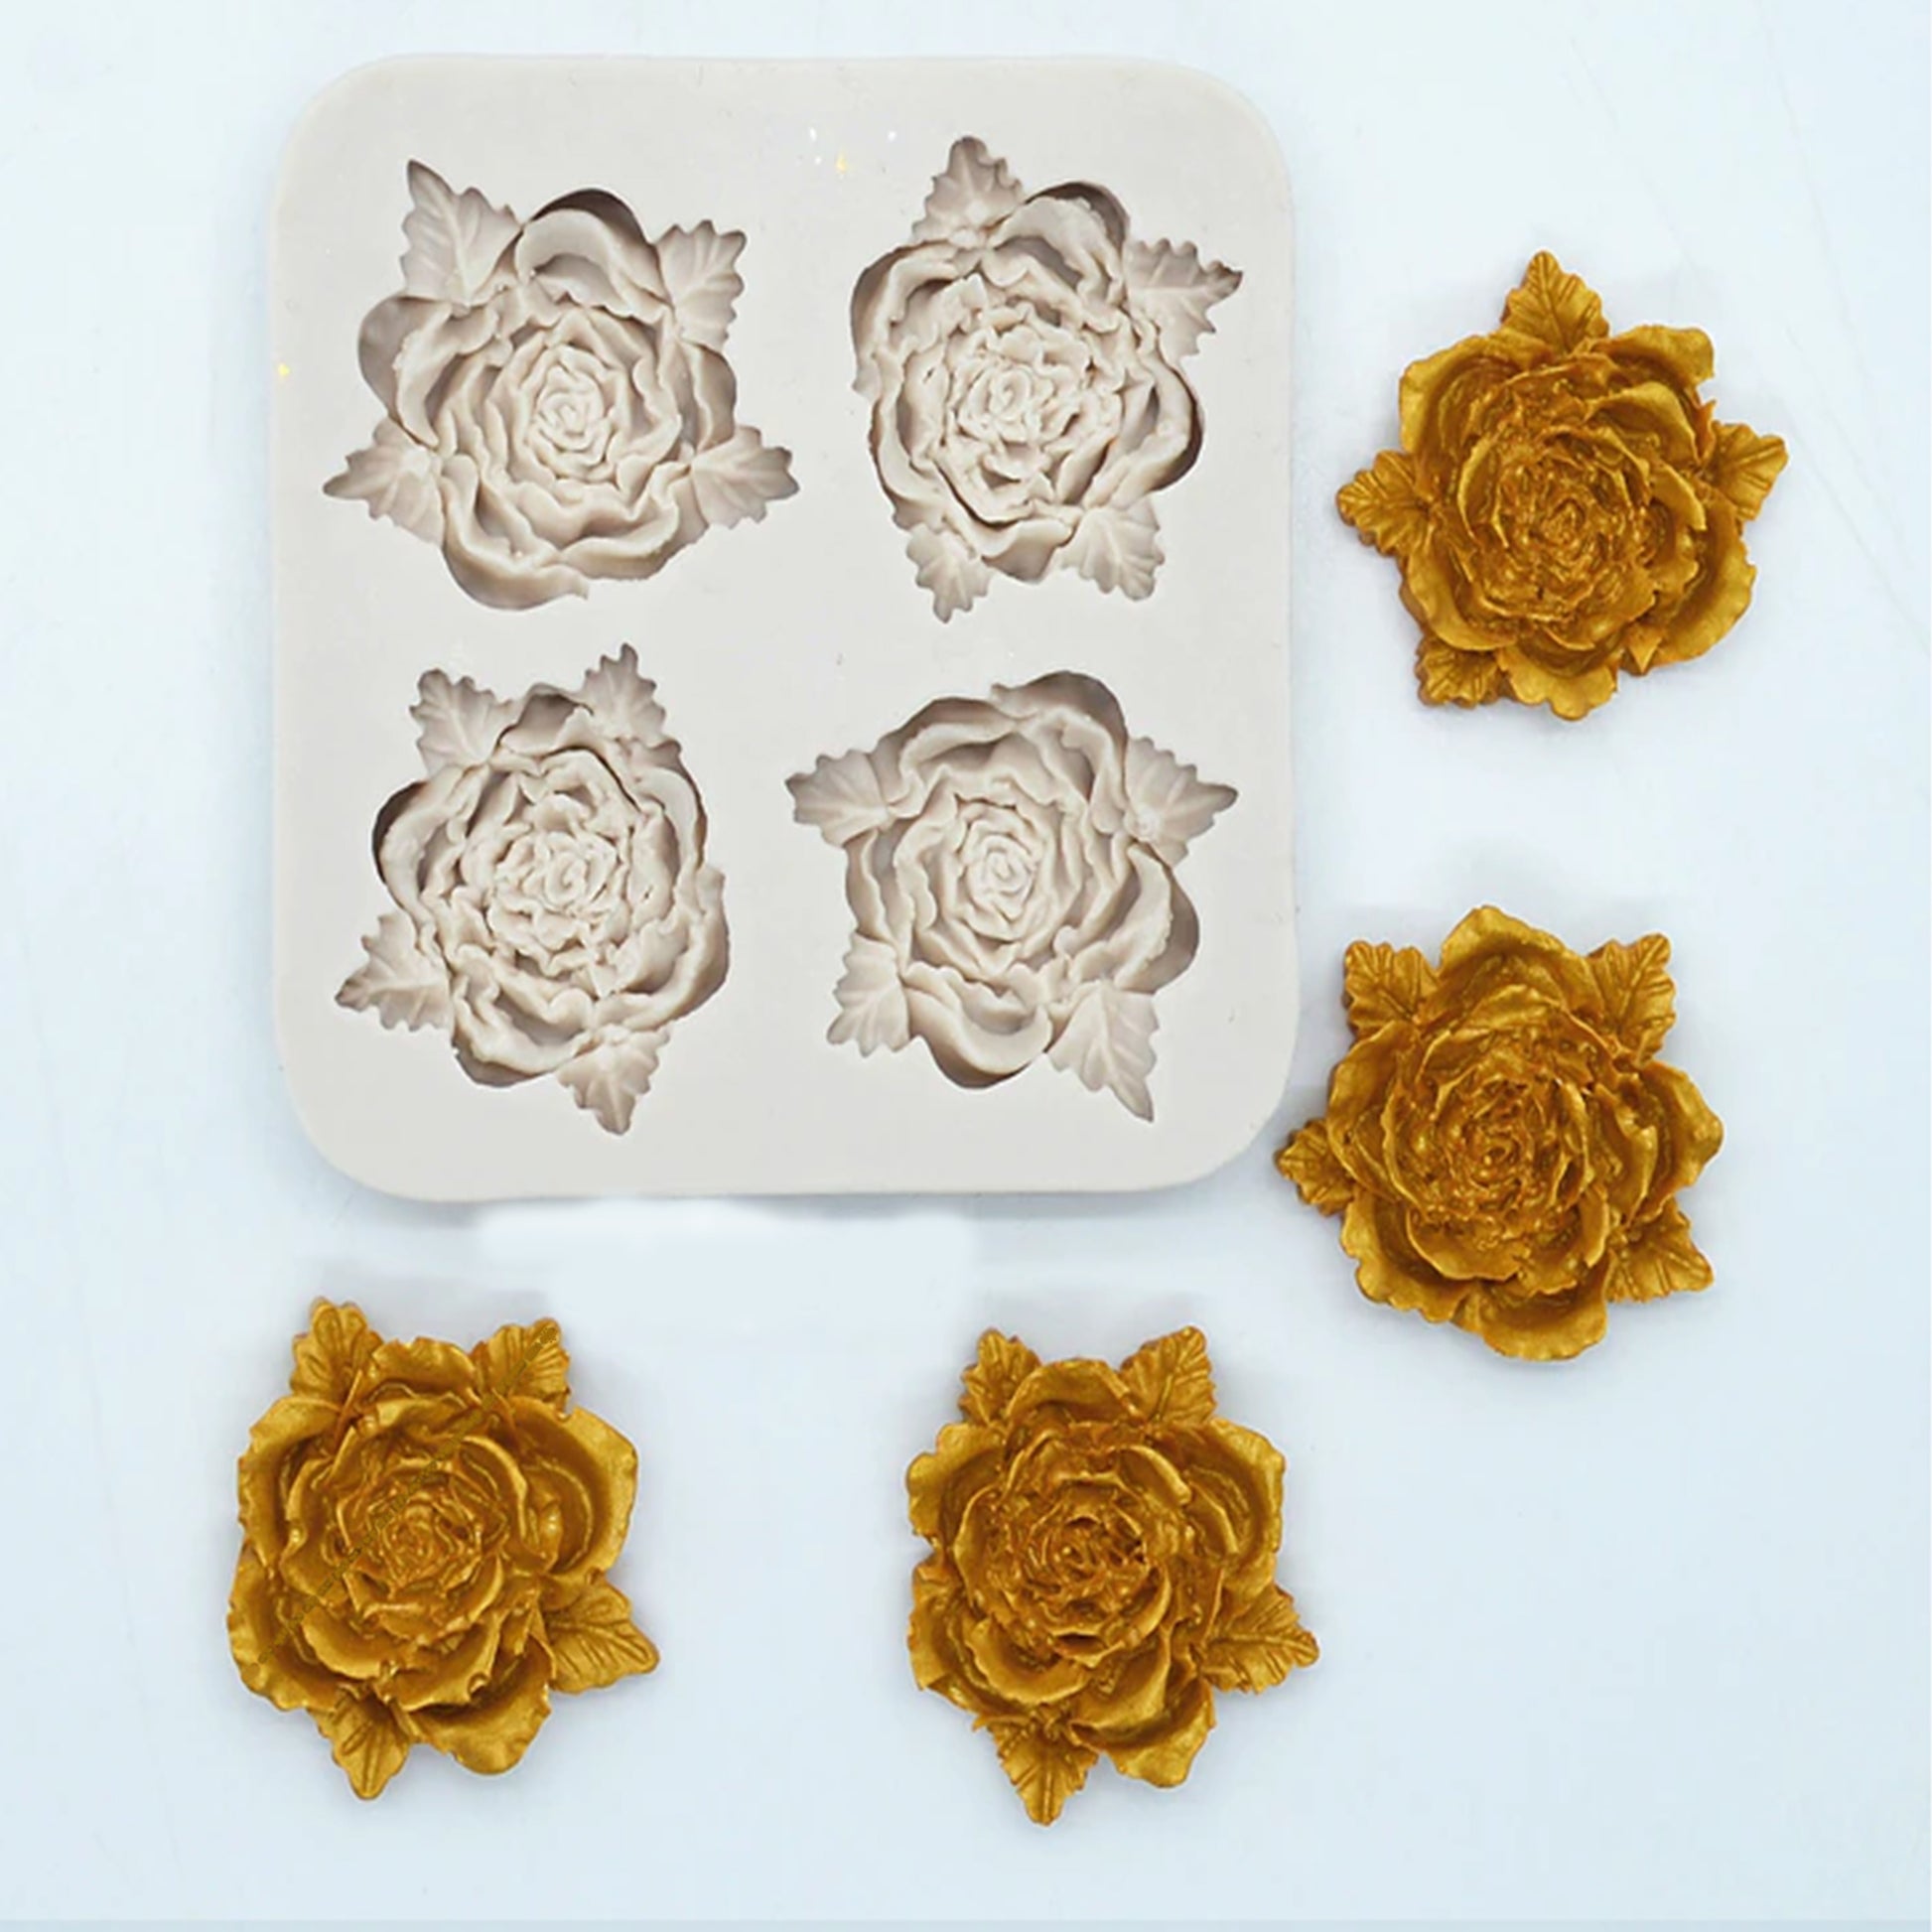 Rose Bud 3D Flower Silicone Mold For DIY Crafts Soap, Candle, Wax